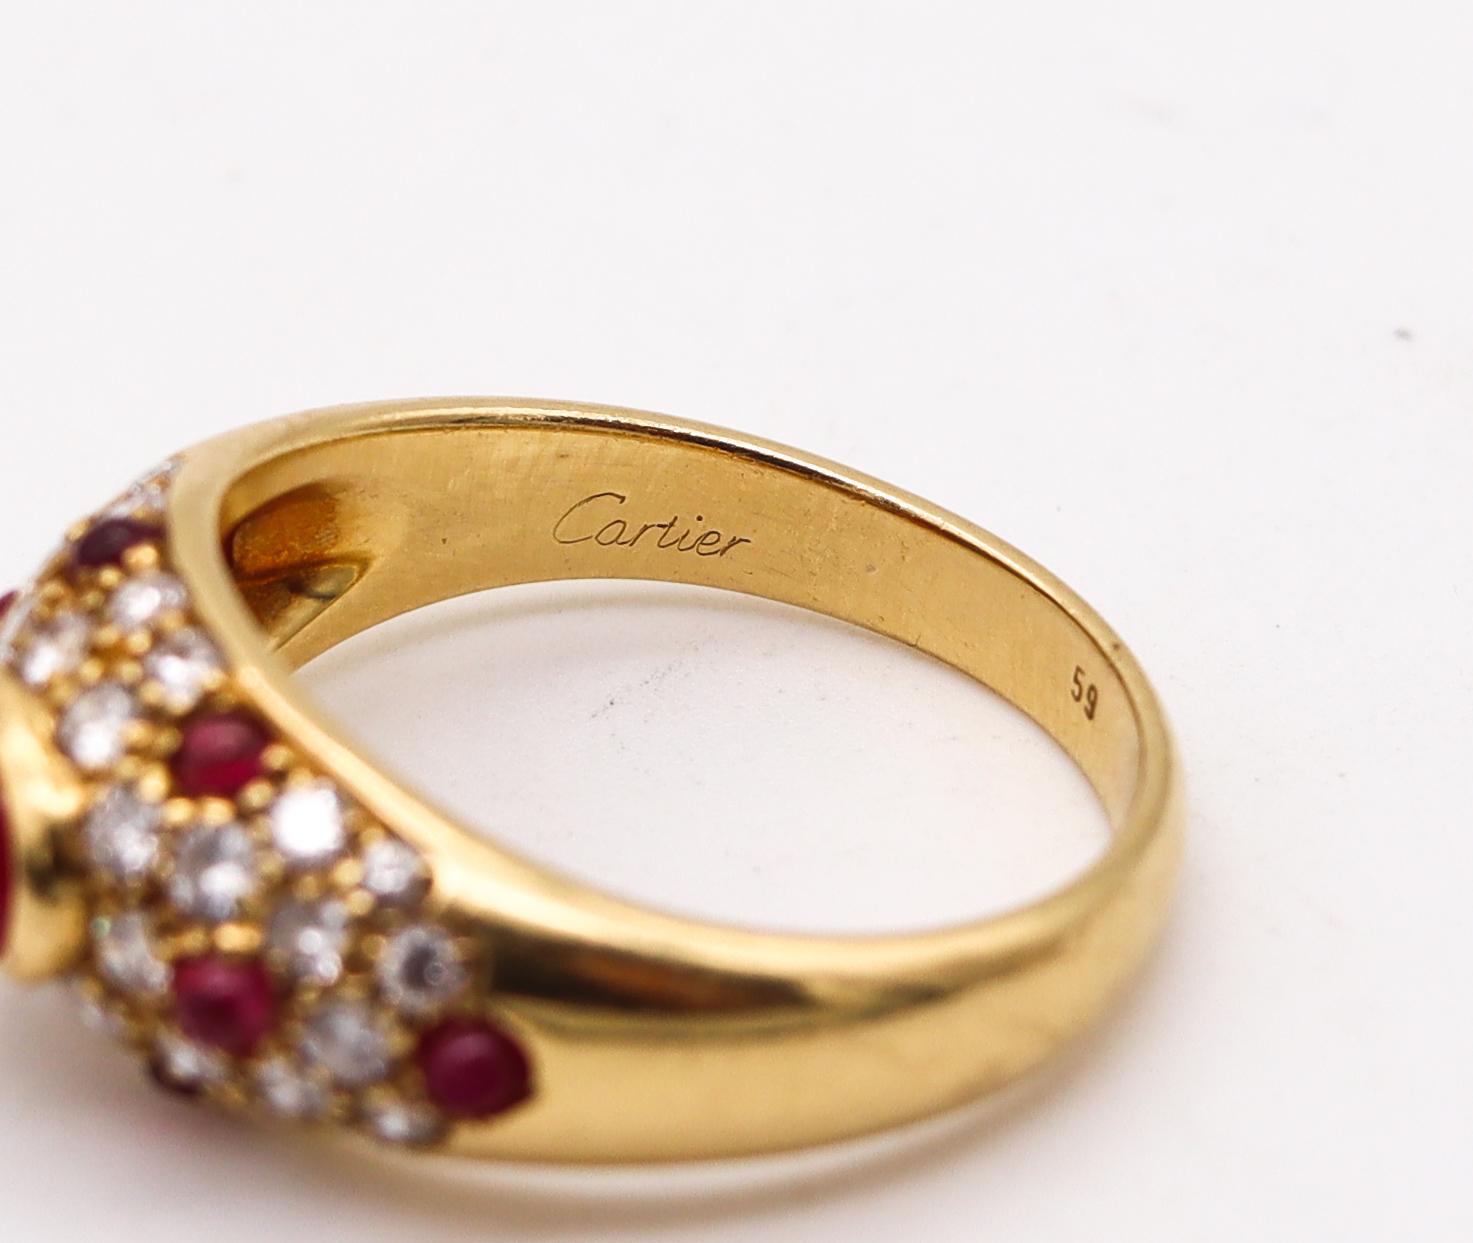 Modernist Cartier Paris 1970 Corinth Ring in 18kt Gold with 2.83ctw in Diamonds & Rubies